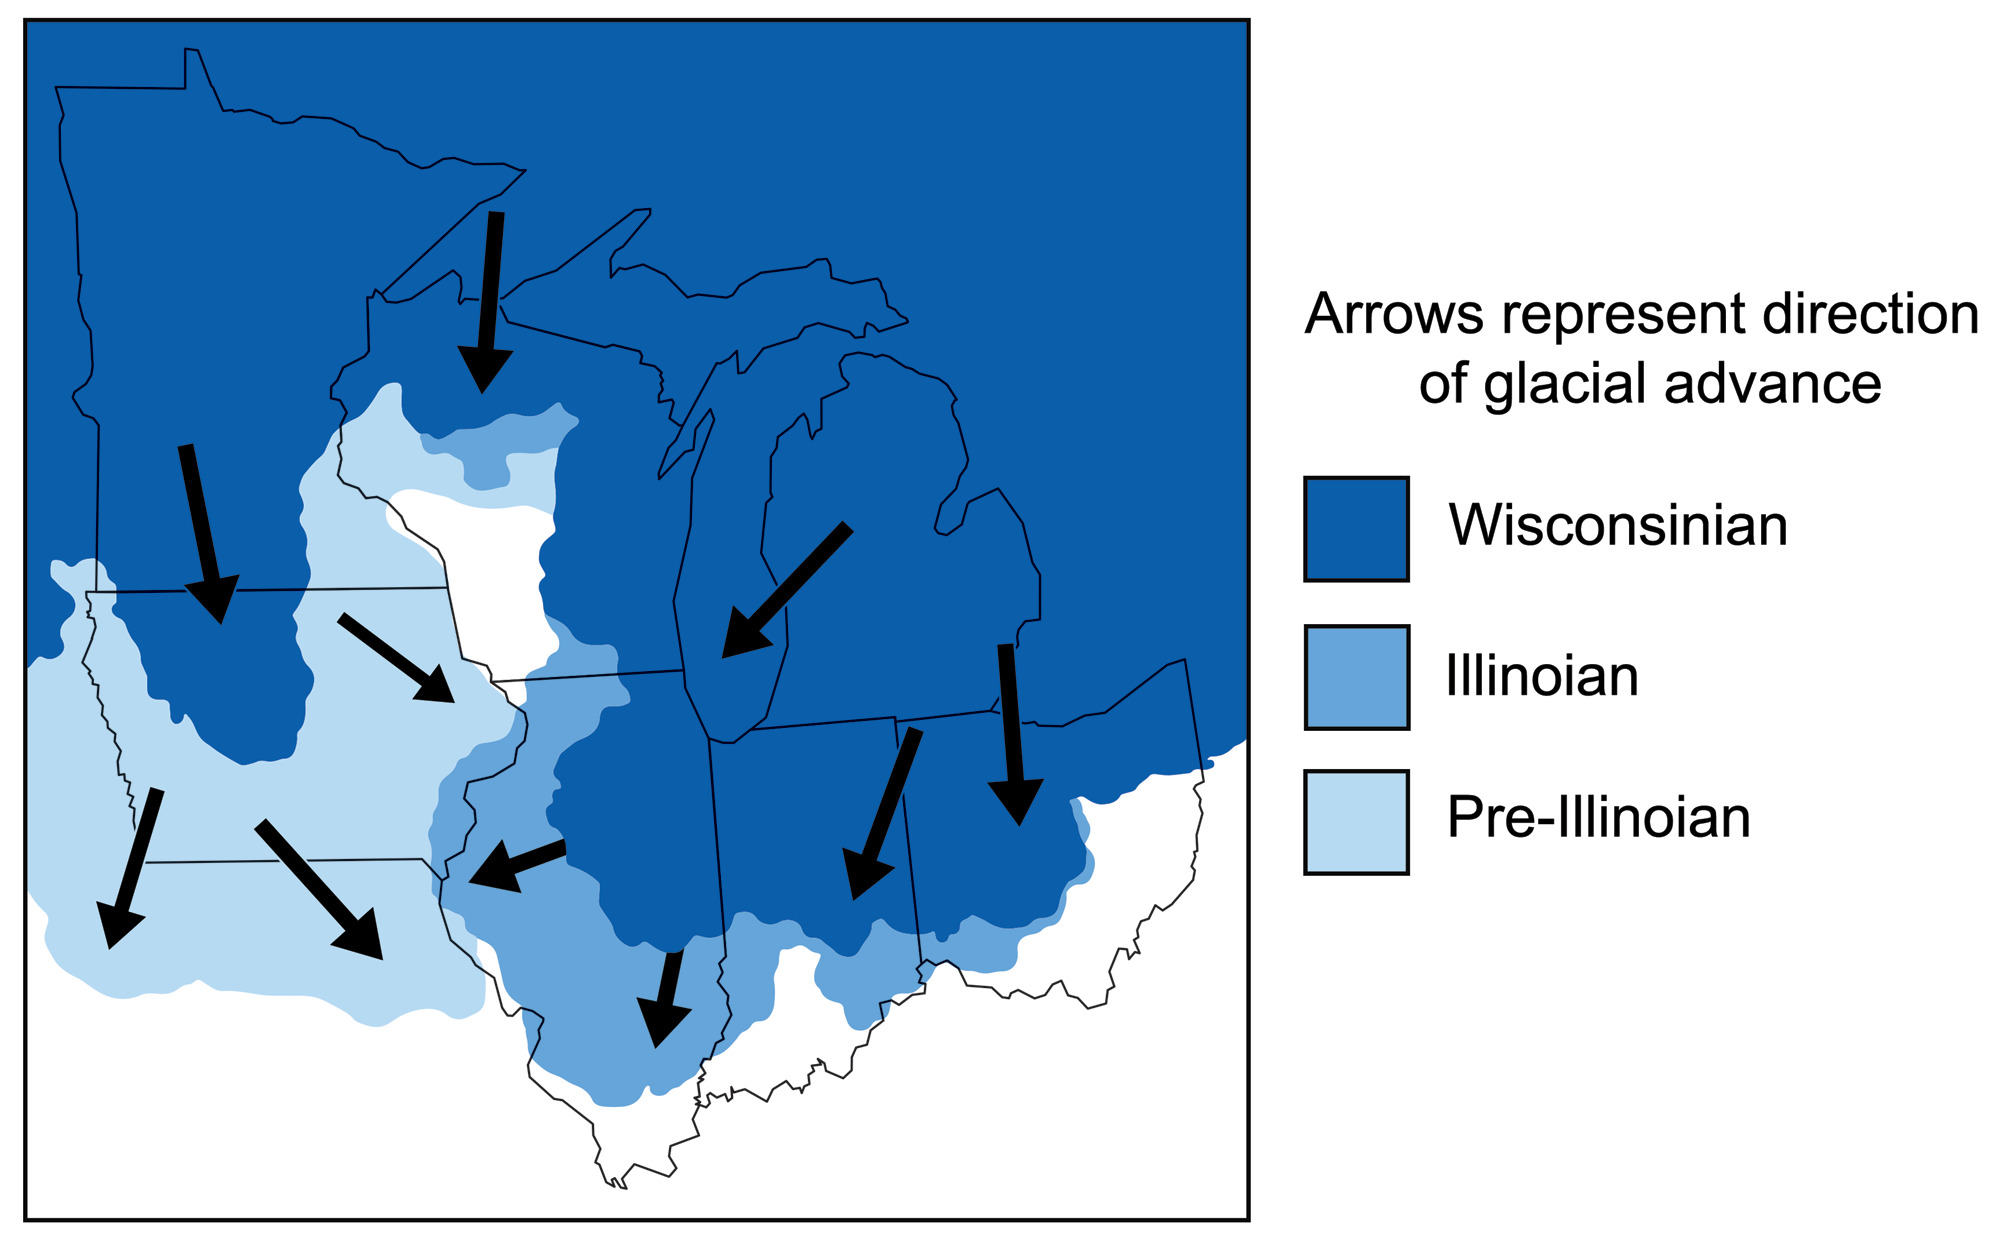 Map showing Pleistocene glaciations in the Midwest. The map shows the midwestern states with their borders outlined in black. Three phases of glaciation are various shades of blue, from pre-Illinoian (light blue) to Illinoian (medium blue) to Wisconsinian (dark blue). The pre-Illinoian gets into Iowa and areas to the south and west of Iowa. The Illinoian covers much of Illinois, part of southern Indiana, and a little of Ohio and Wisconsin. The Wisconsinian, which is the most recent, covers much of Minnesota, part of north-western Iowa, northern and eastern Wisconsin, northeastern Illinois, all of Michigan, northern Indiana, and northern Ohio.